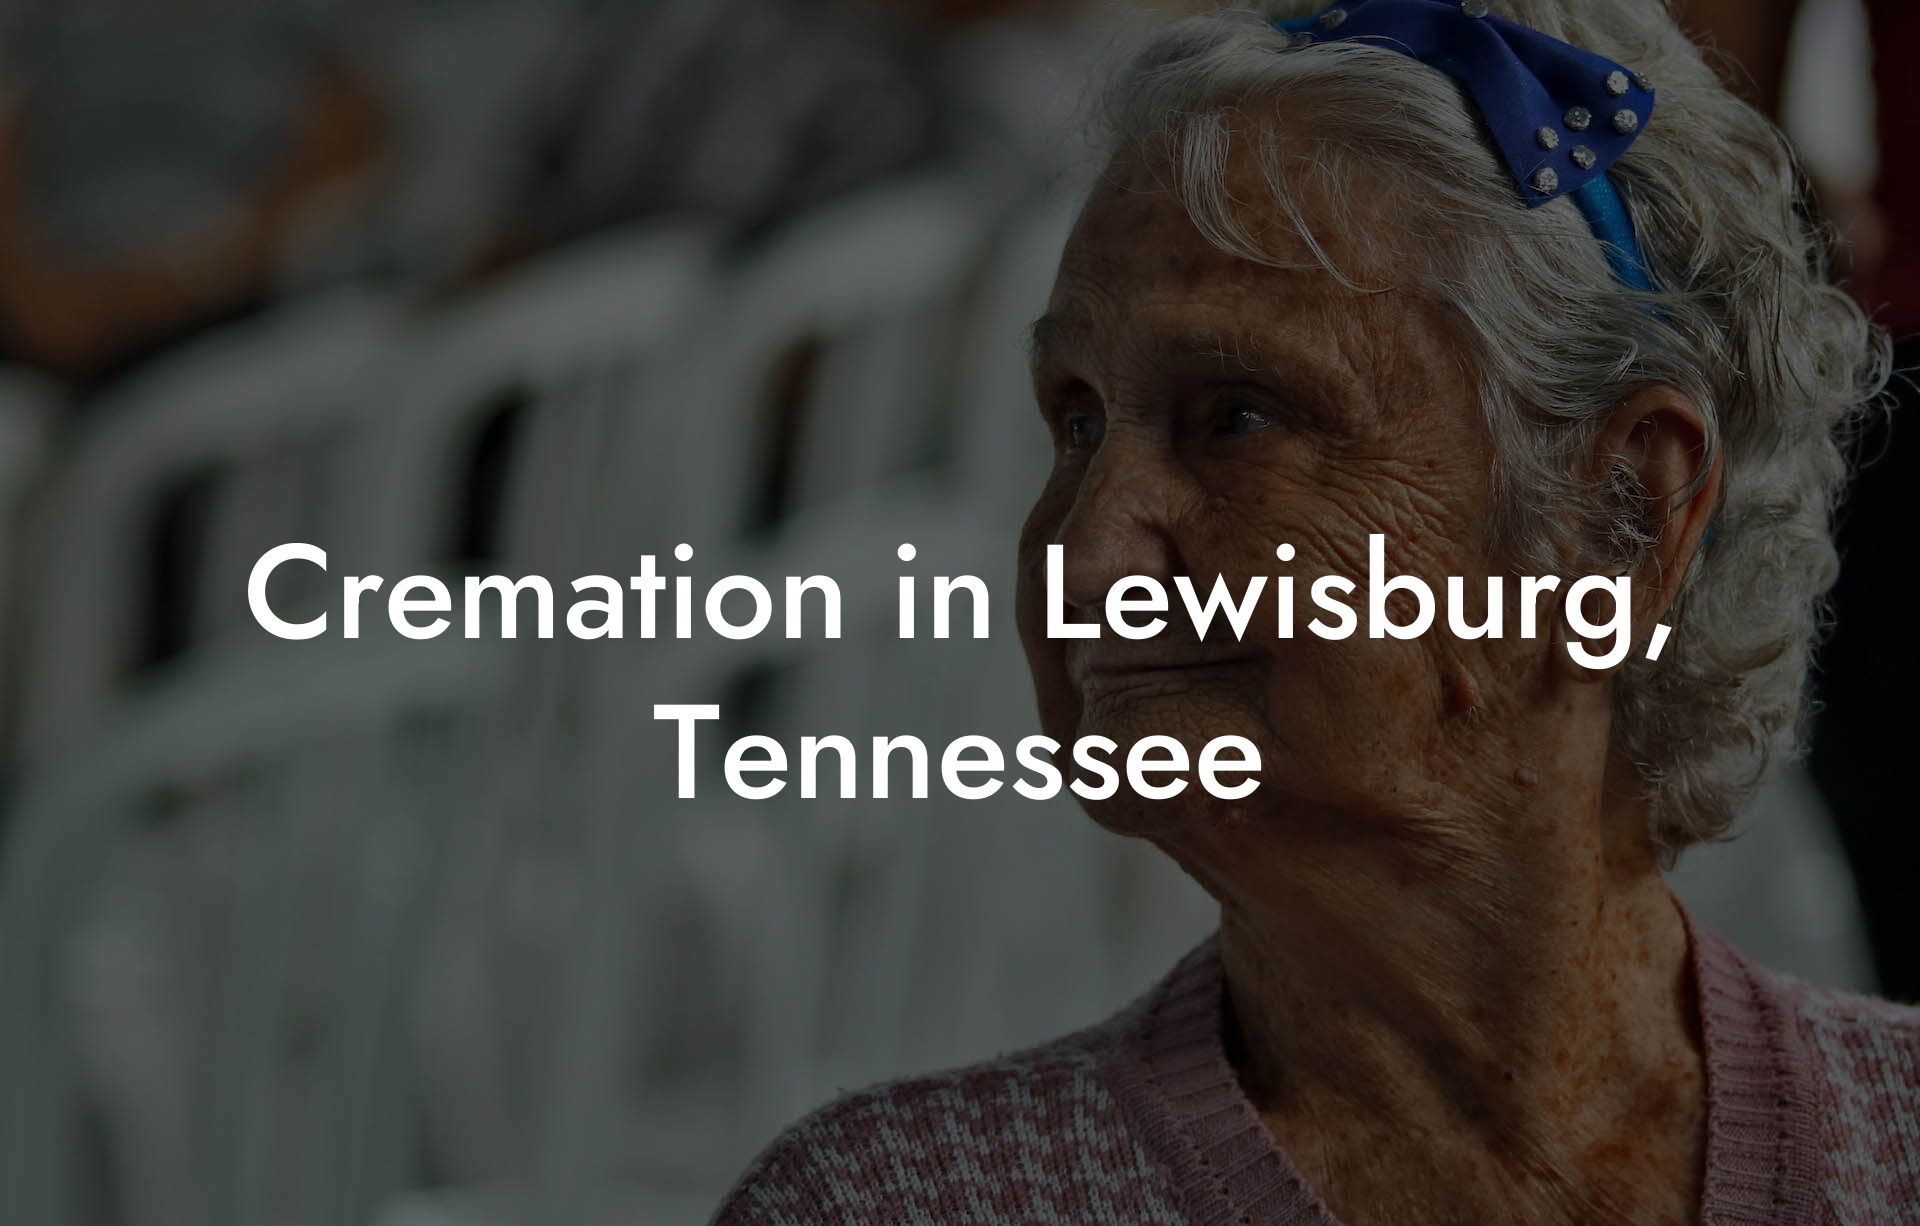 Cremation in Lewisburg, Tennessee